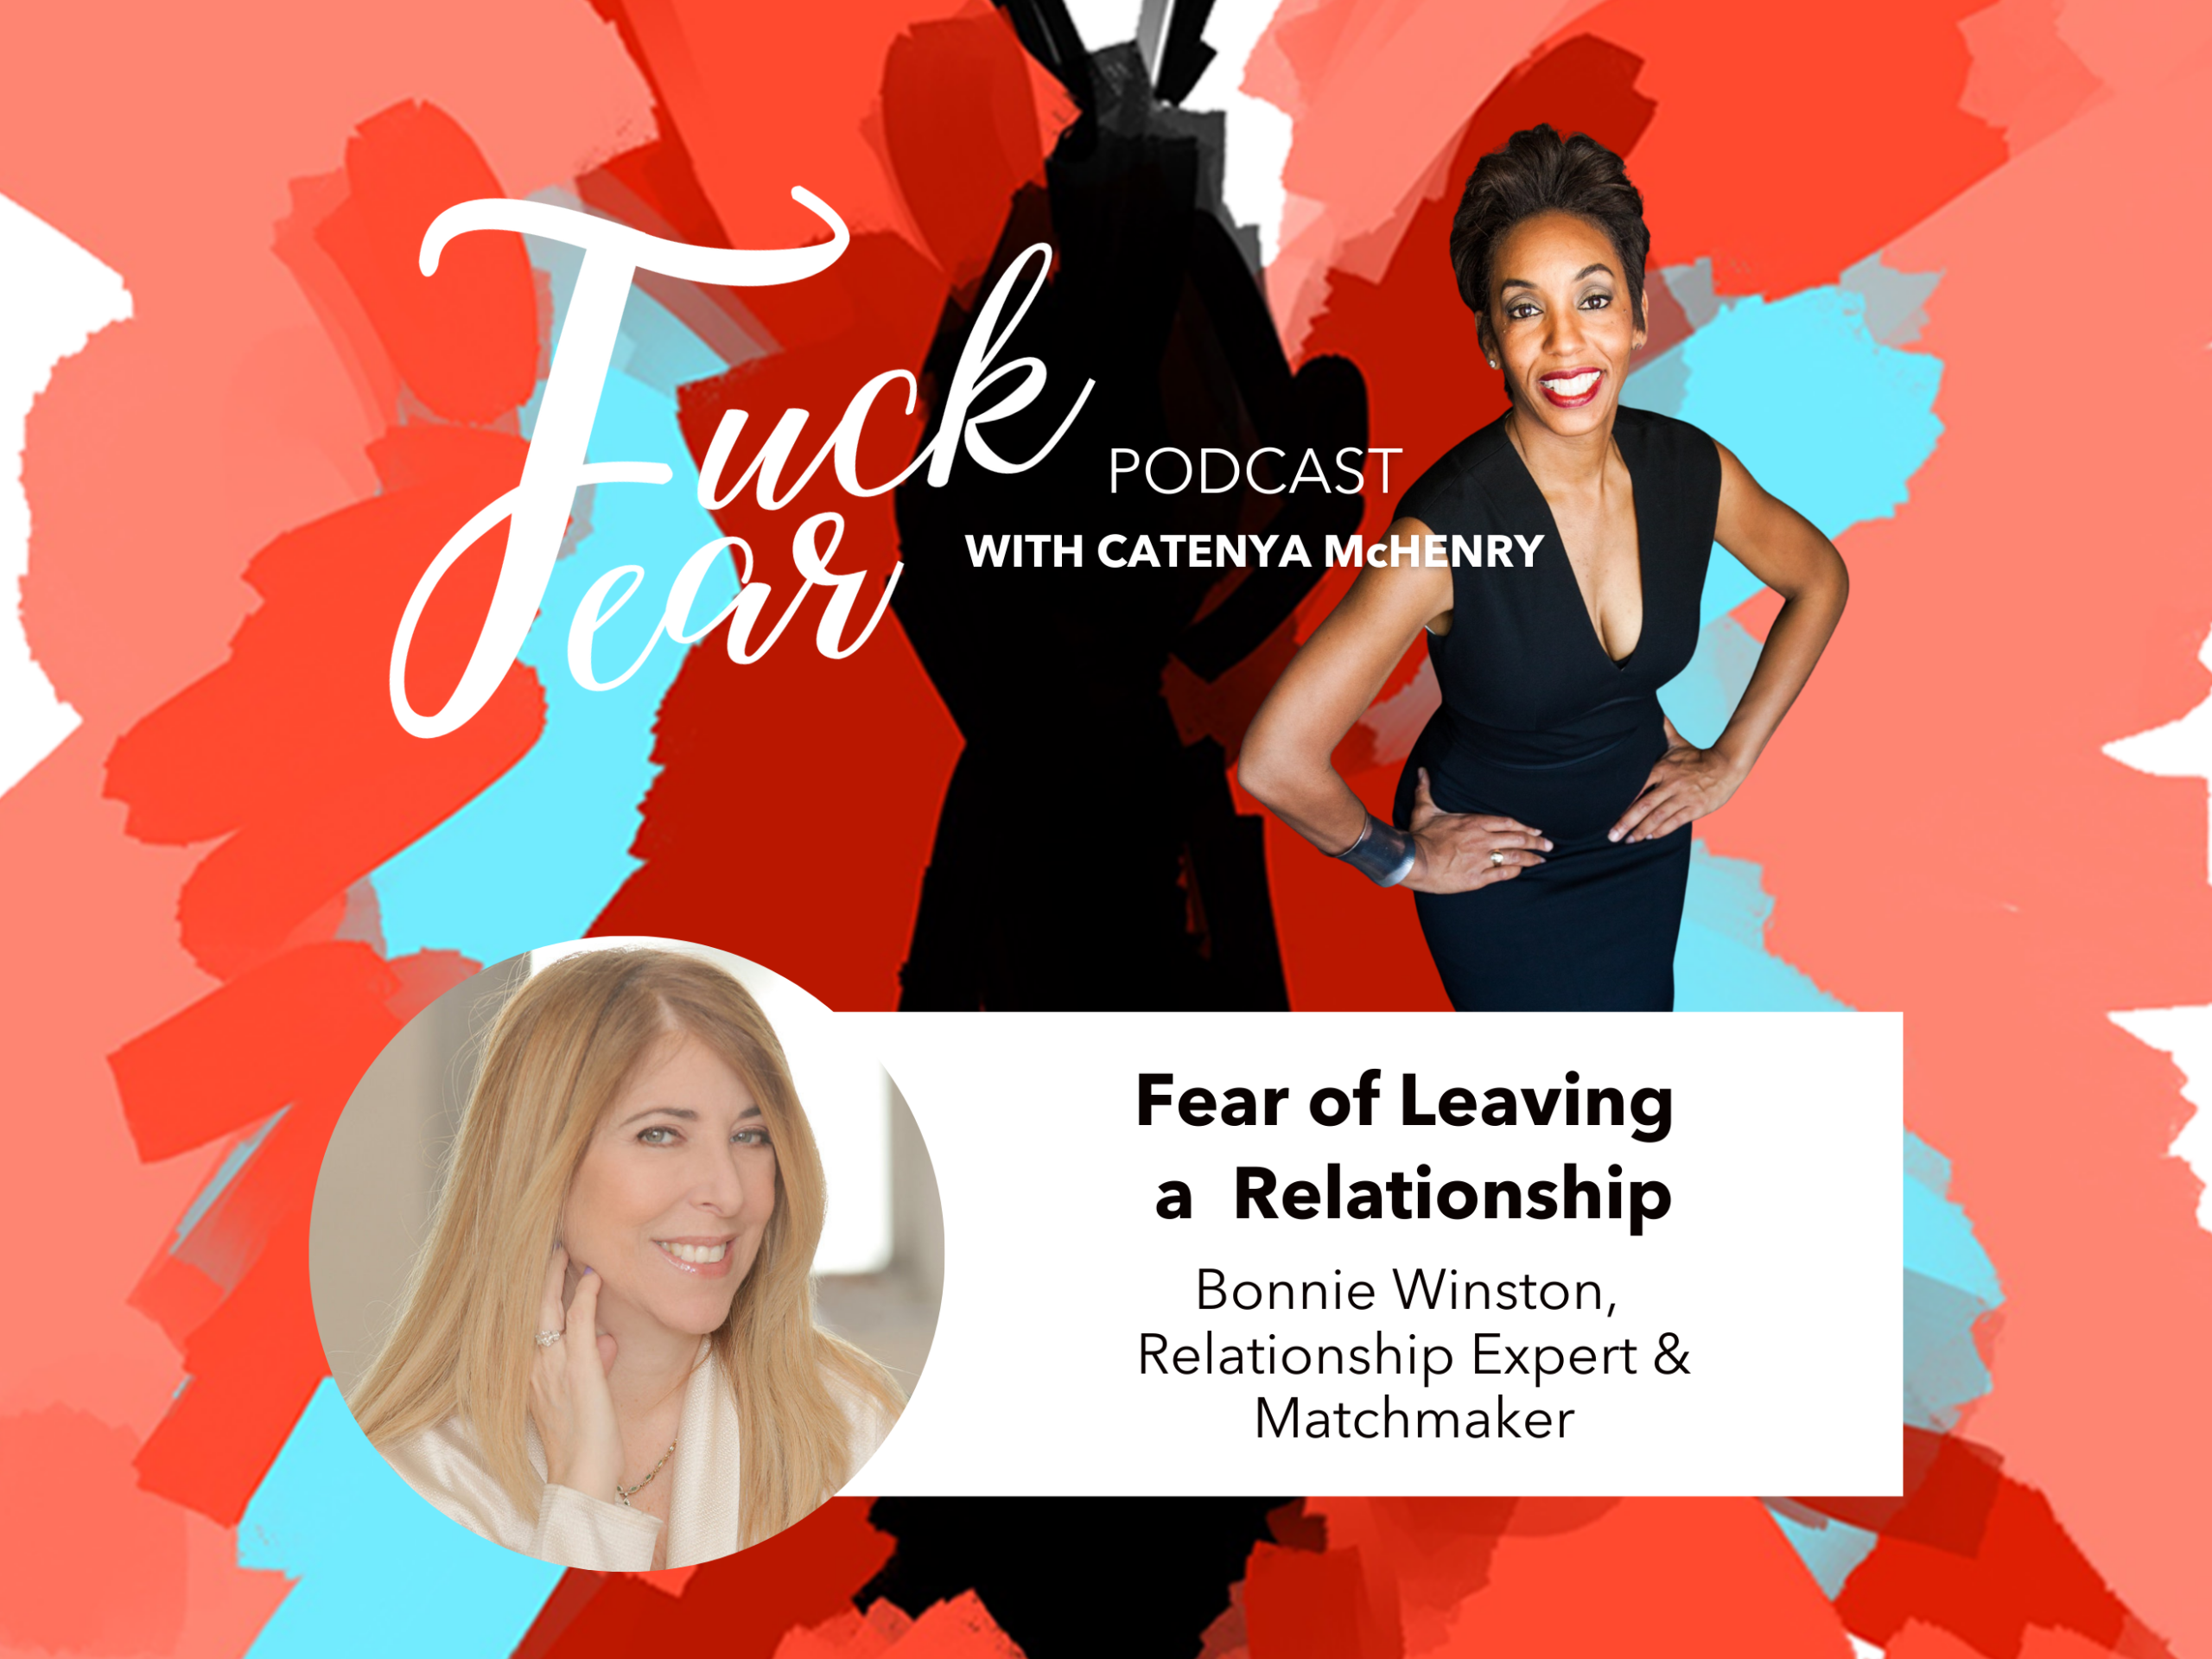 Fear of Leaving a Relationship on the Fuck Fear podcast with host Catenya McHenry and guest celebrity matchmaker Bonnie Winston